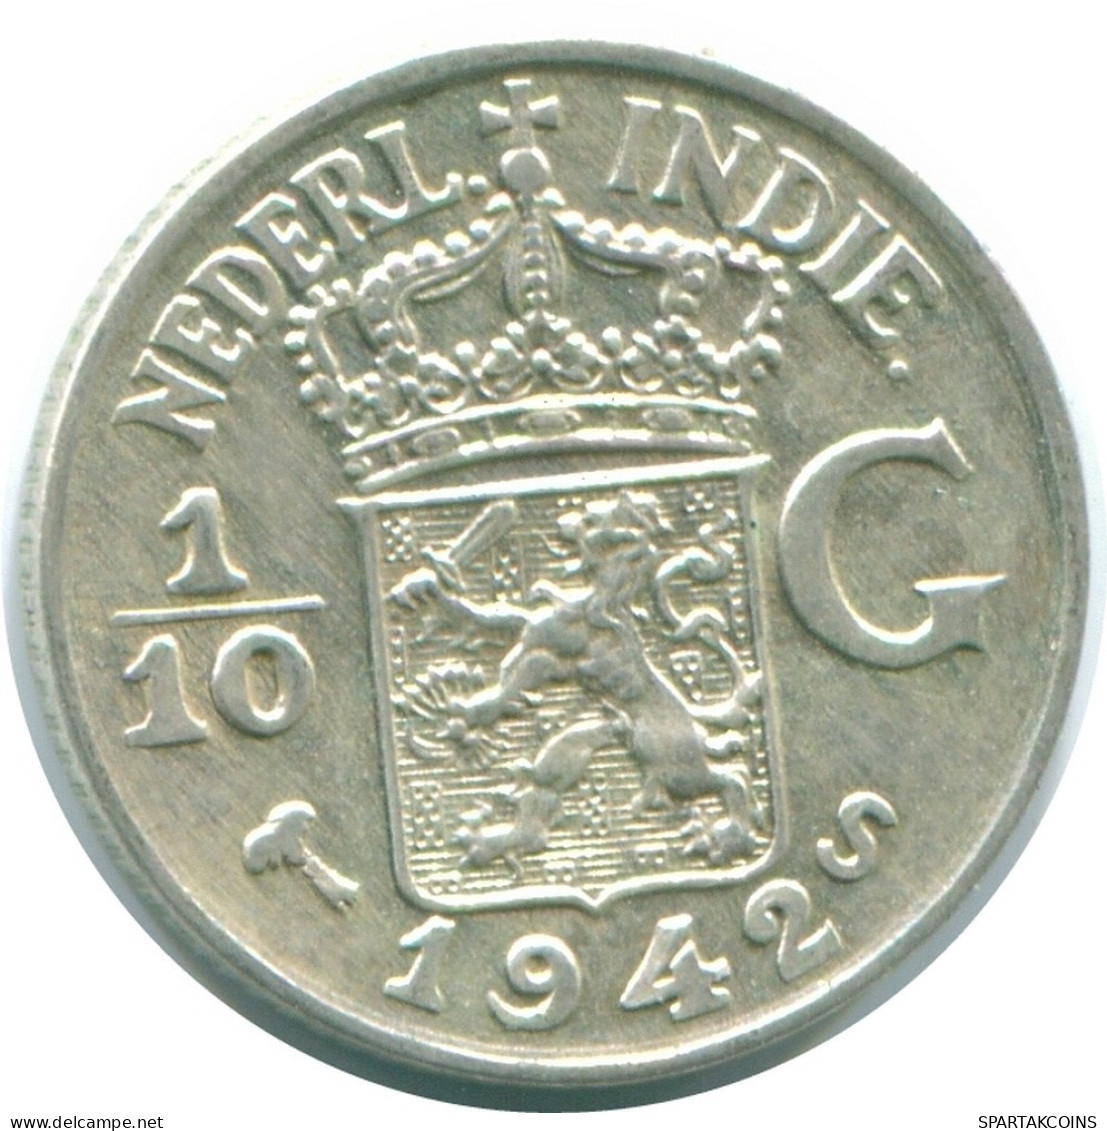 1/10 GULDEN 1942 NETHERLANDS EAST INDIES SILVER Colonial Coin #NL13891.3.U.A - Indes Neerlandesas